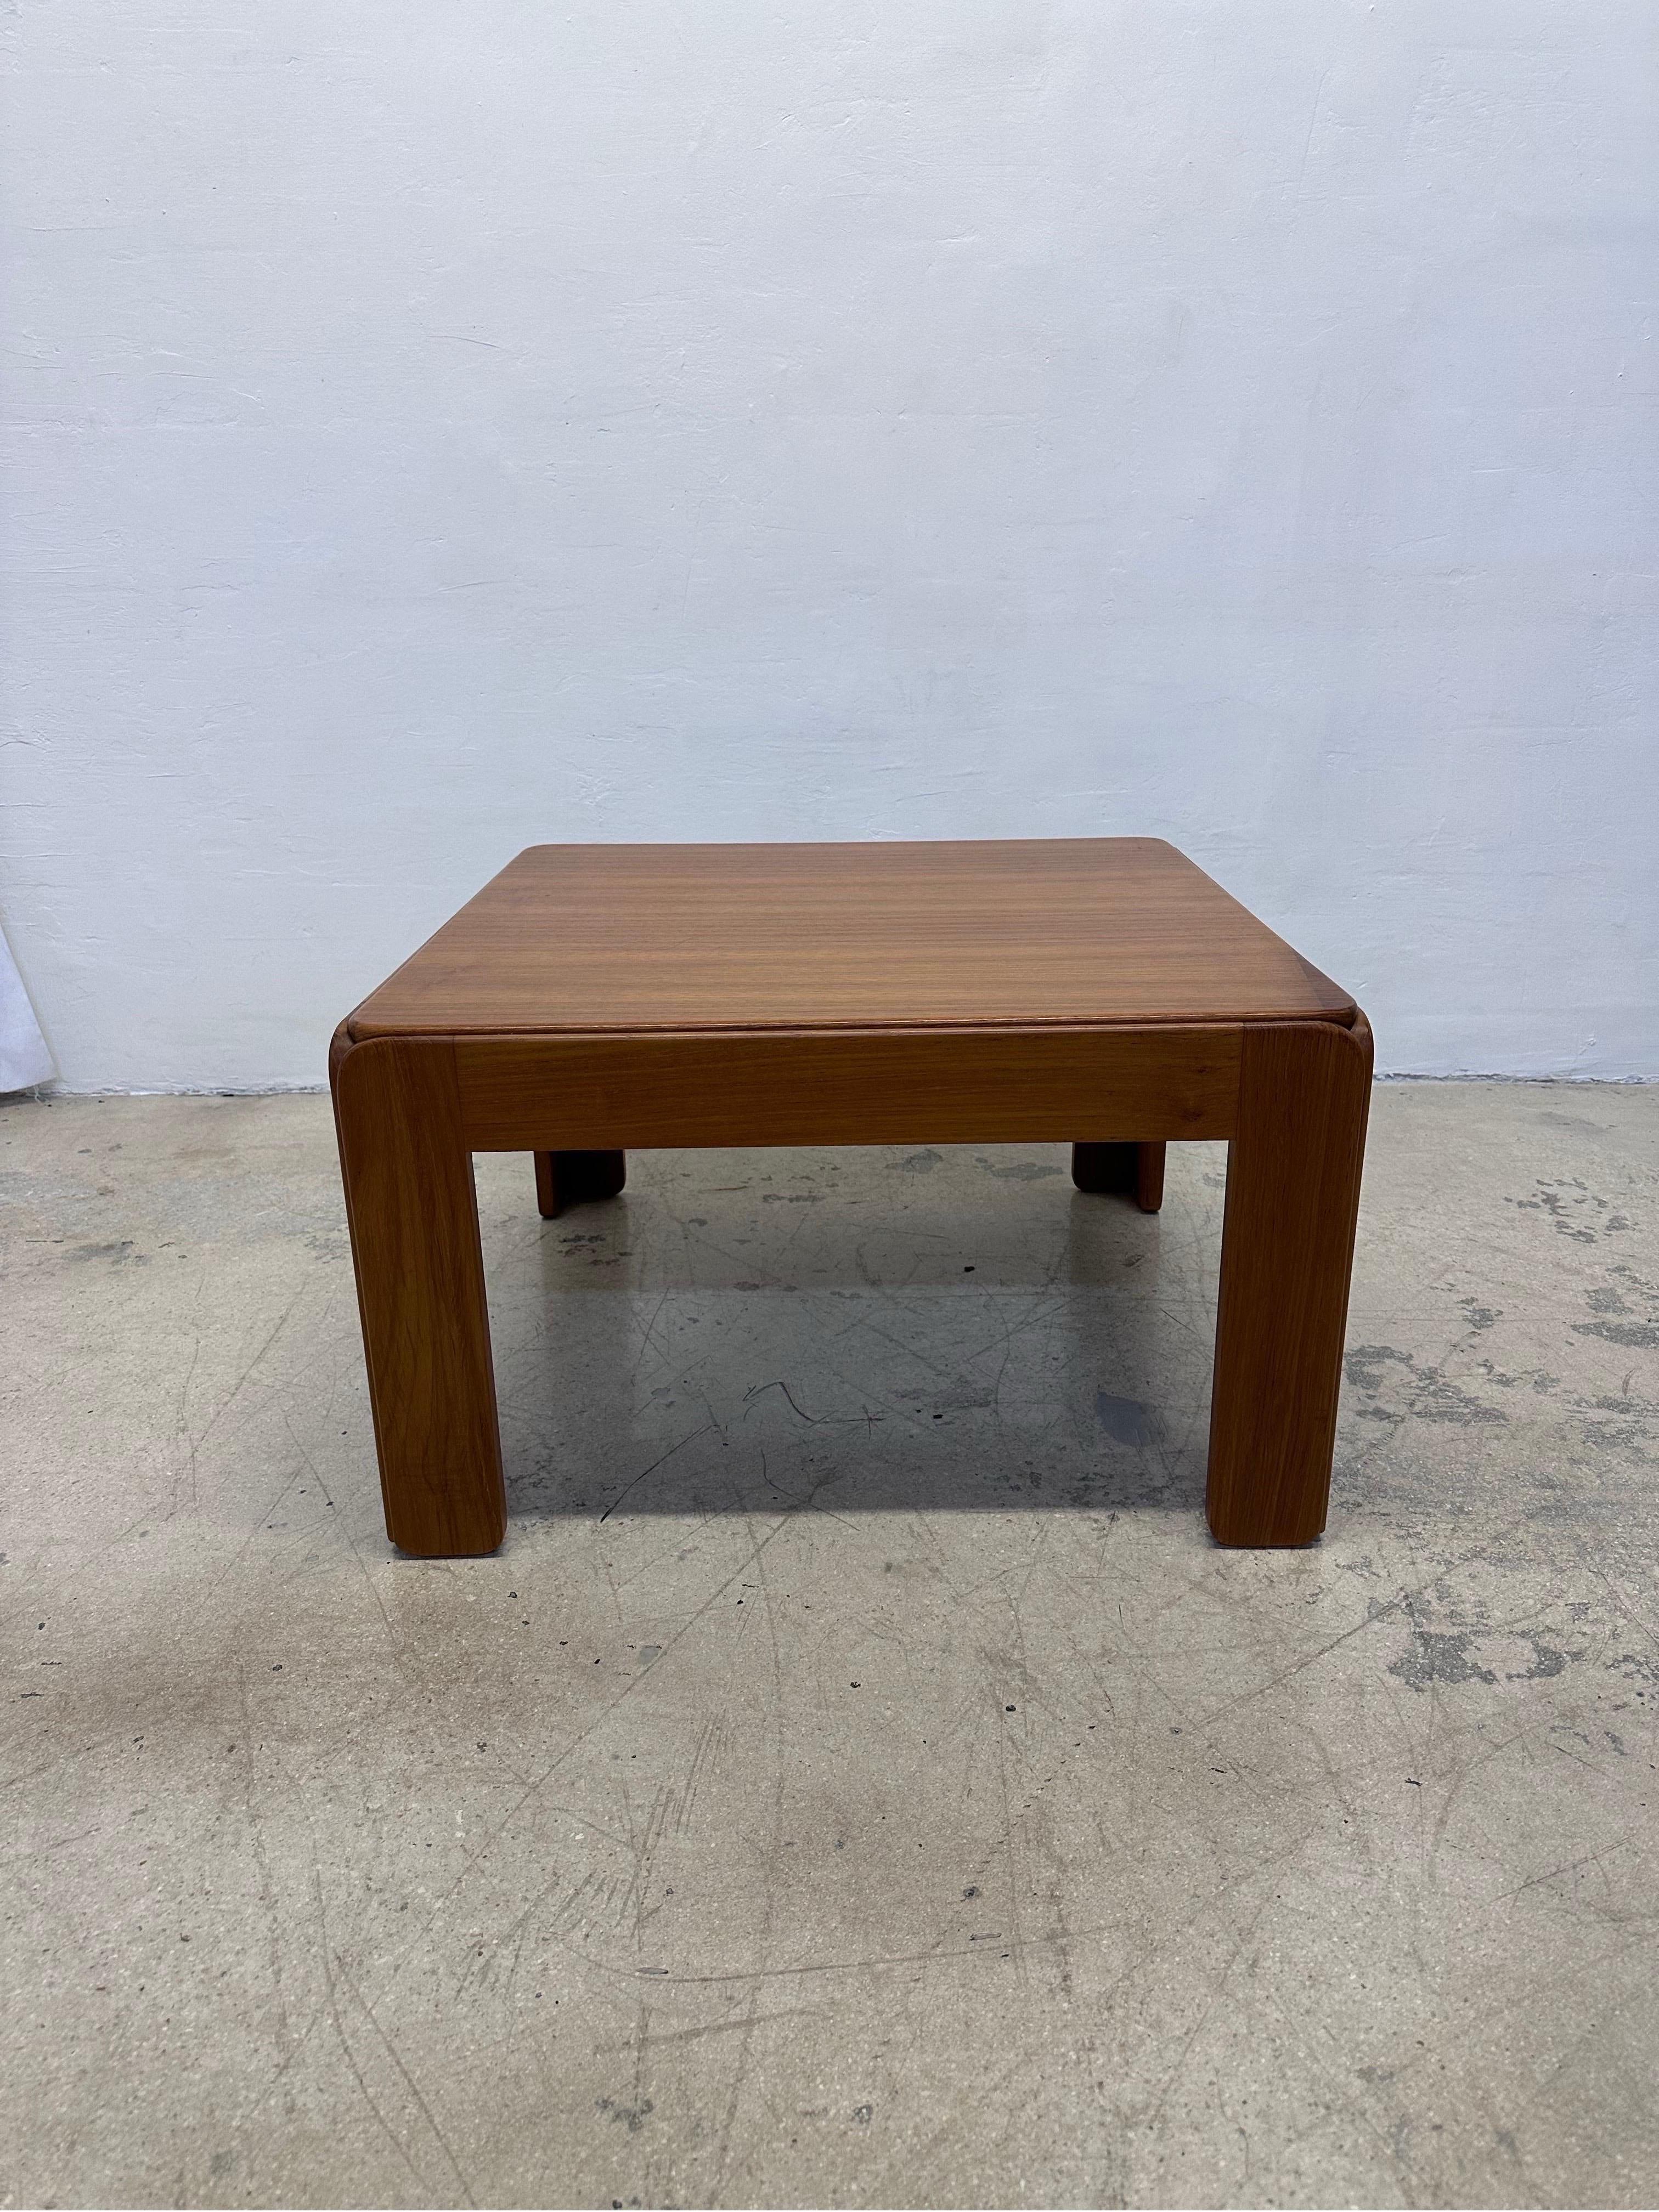 Mid-Century Danish Modern wood coffee table with semi-matte finish by Illum Wikkelso for Niels Eilersen circa 1960s.